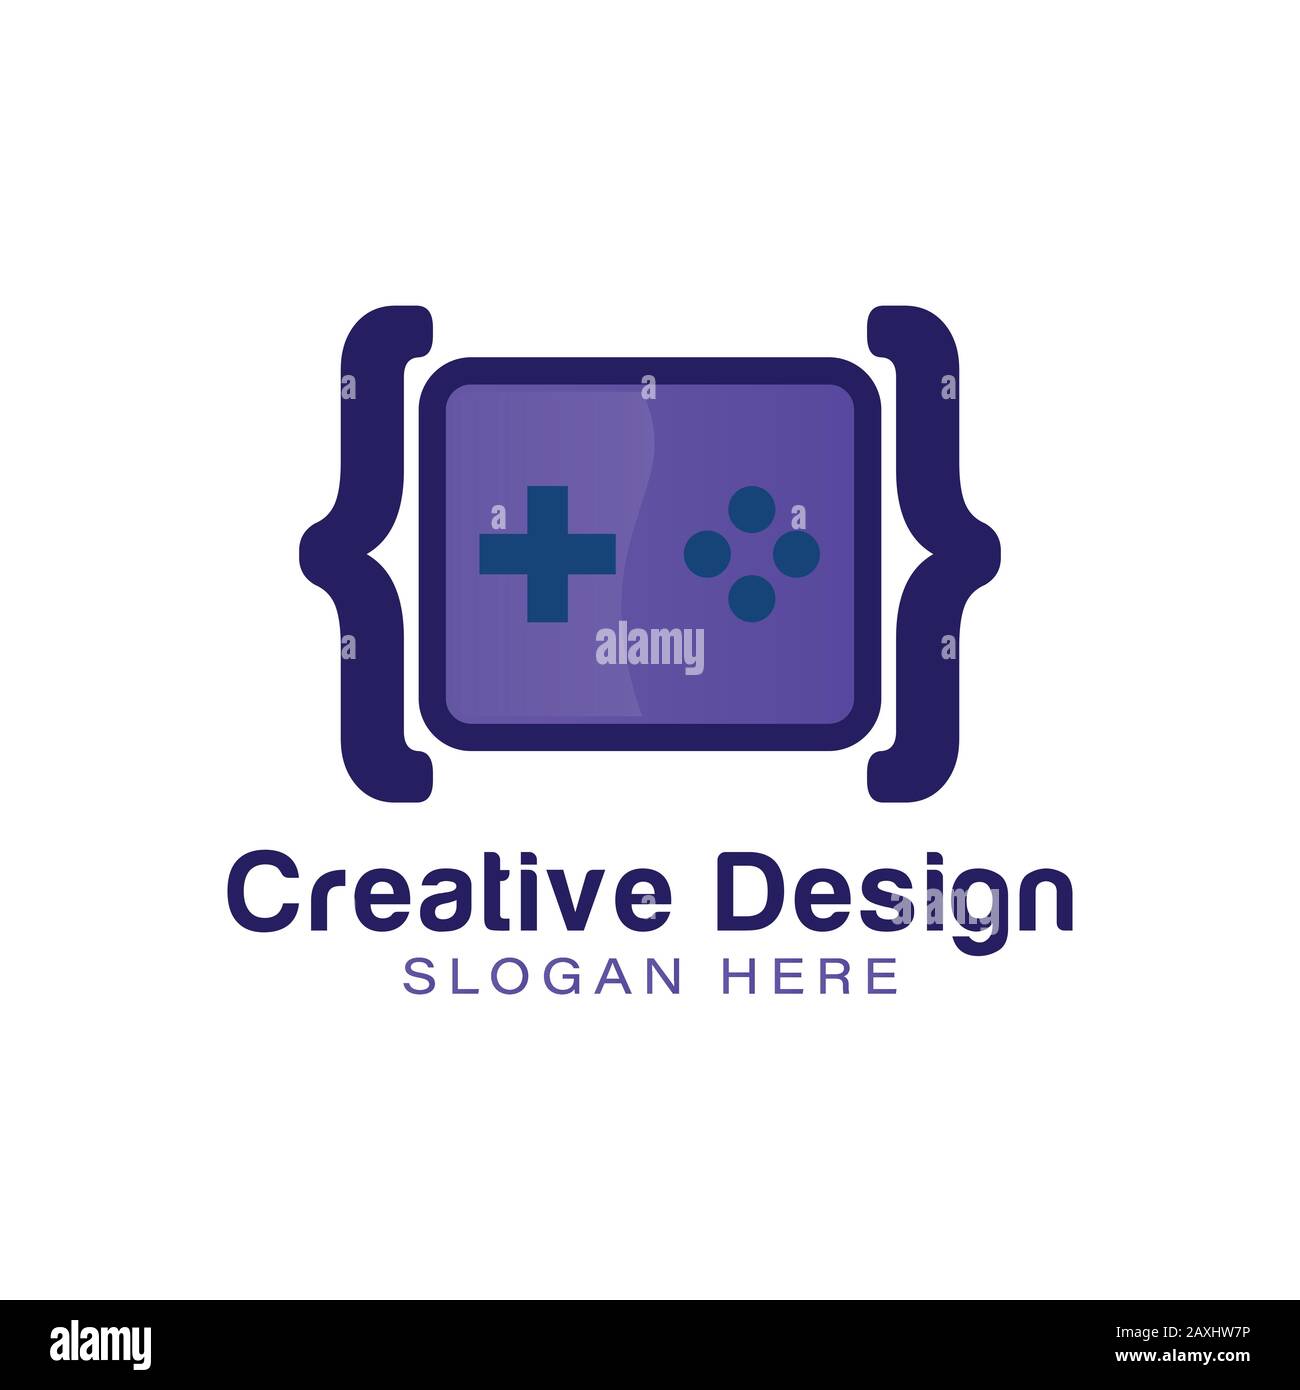 Logos for Gamers – Design Ideas and Templates for Gamers